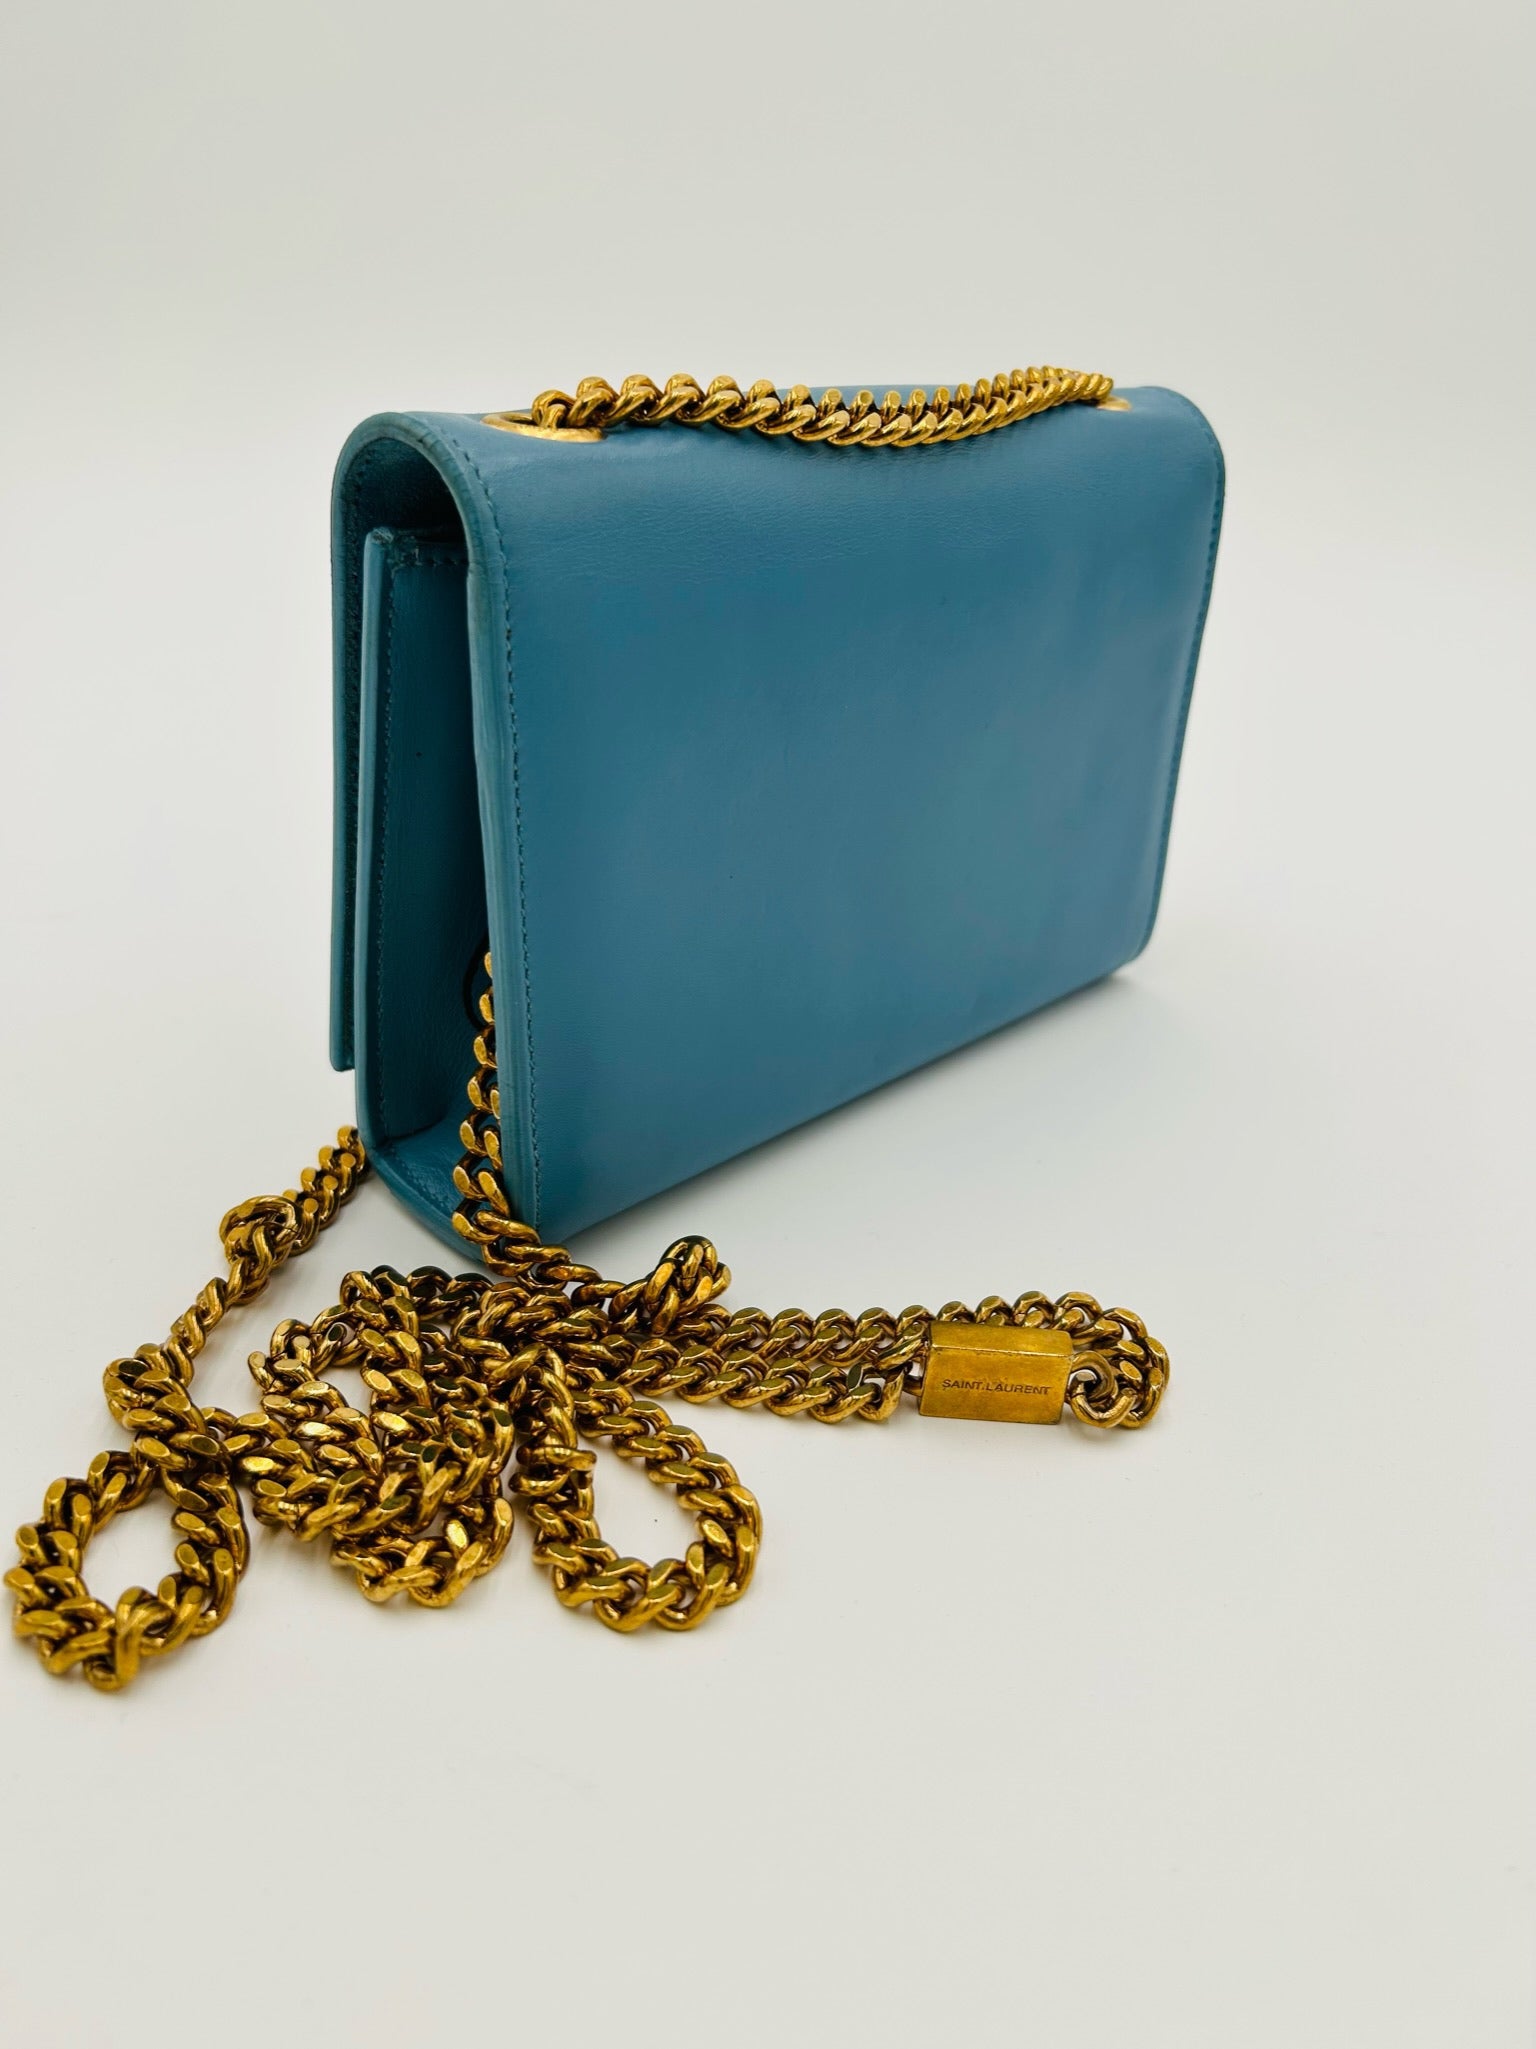 YSL KATE SMALL CHAIN BAG IN GRAIN DE POUDRE LEATHER LIGHT BABY BLUE